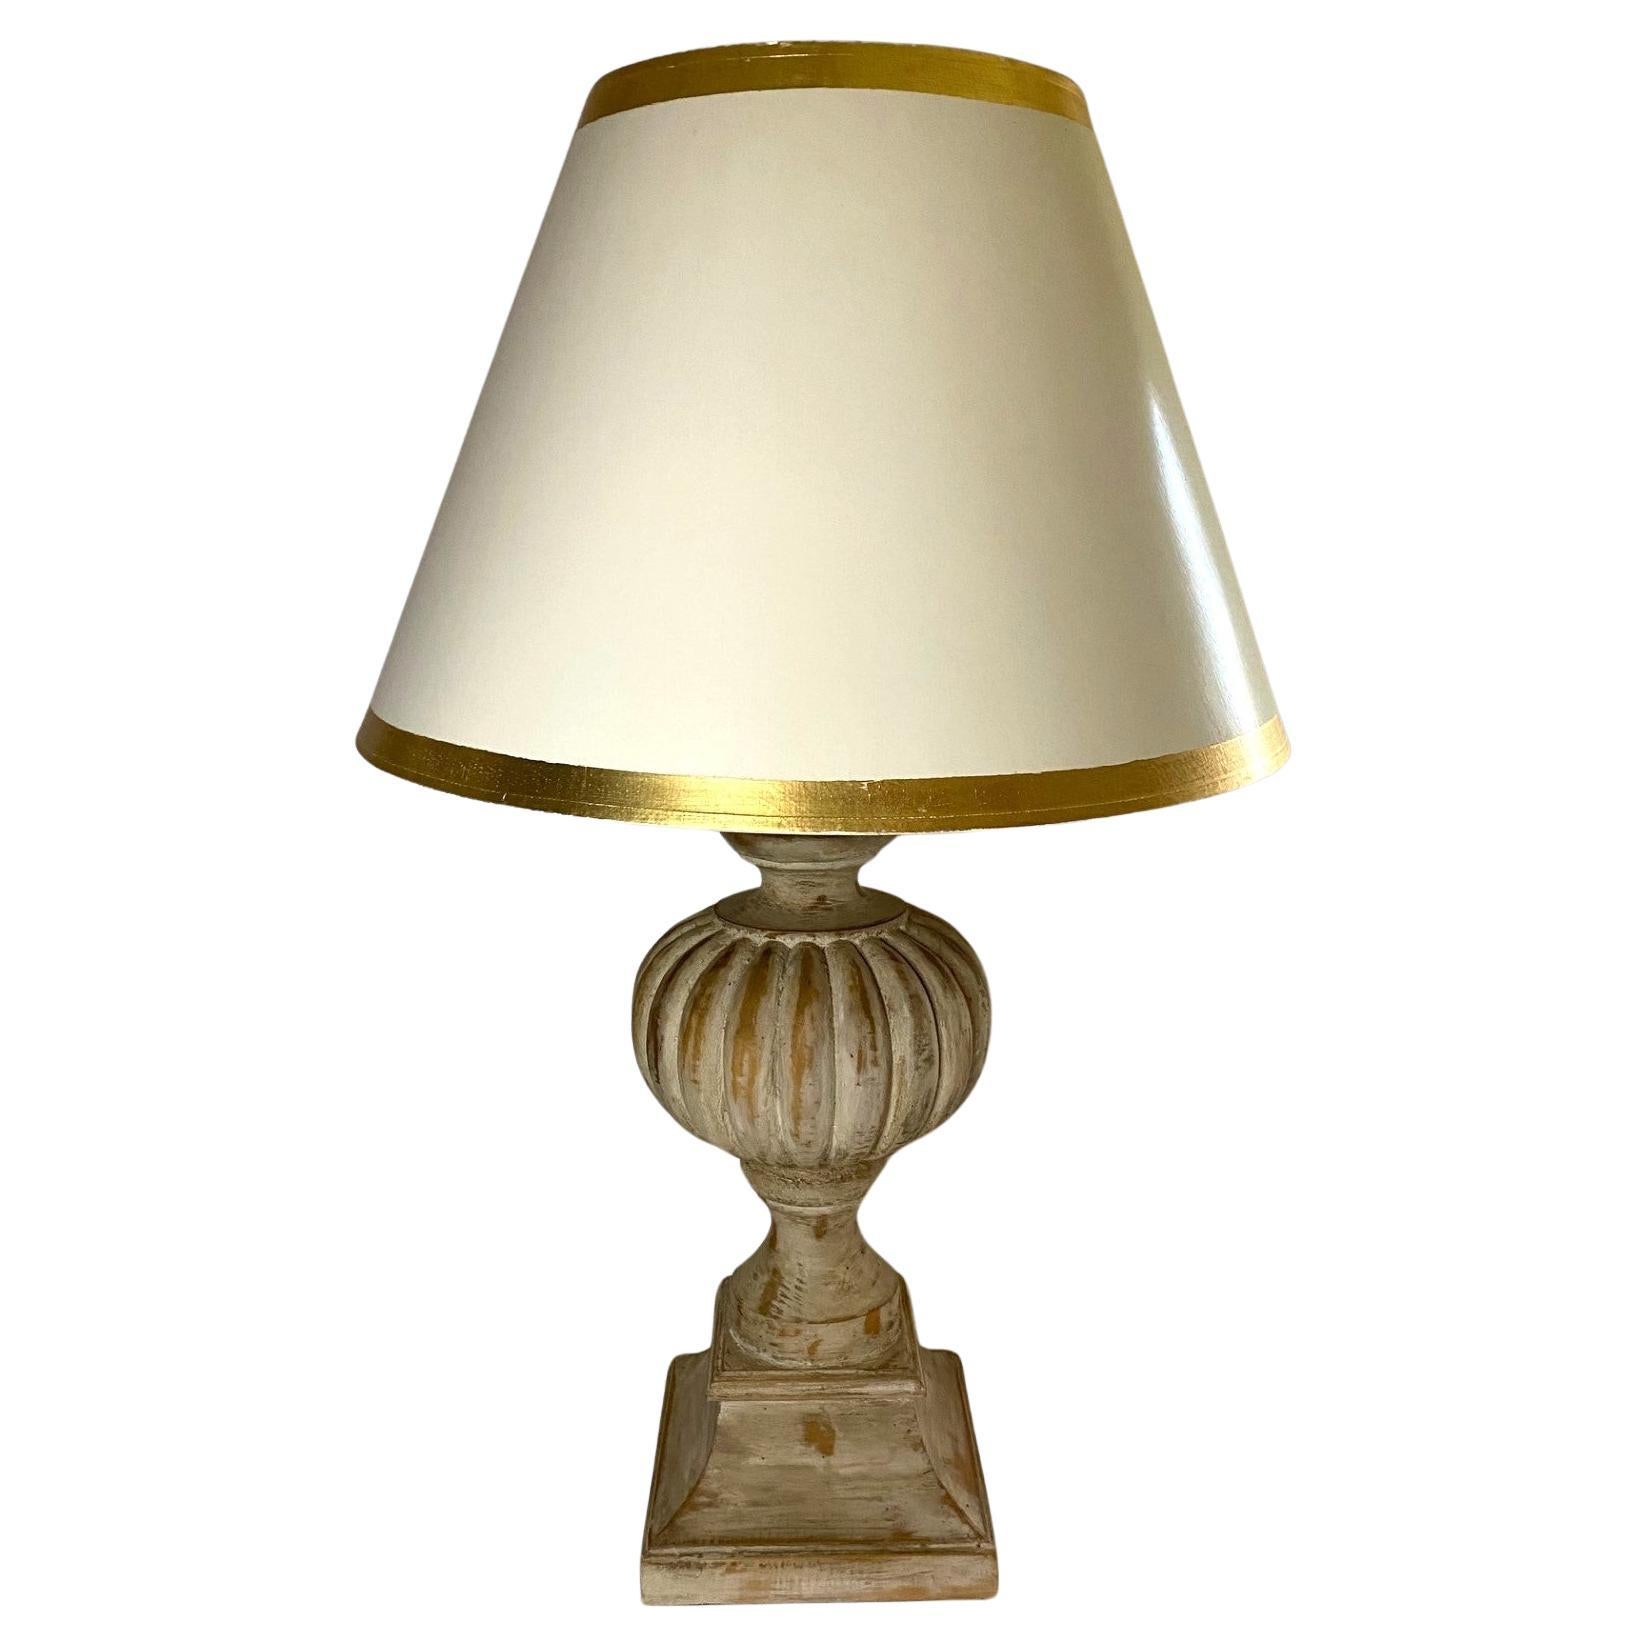 "Pumpkin" Table Lamp with Antique White Finish and Shade with Gilt Trim For Sale